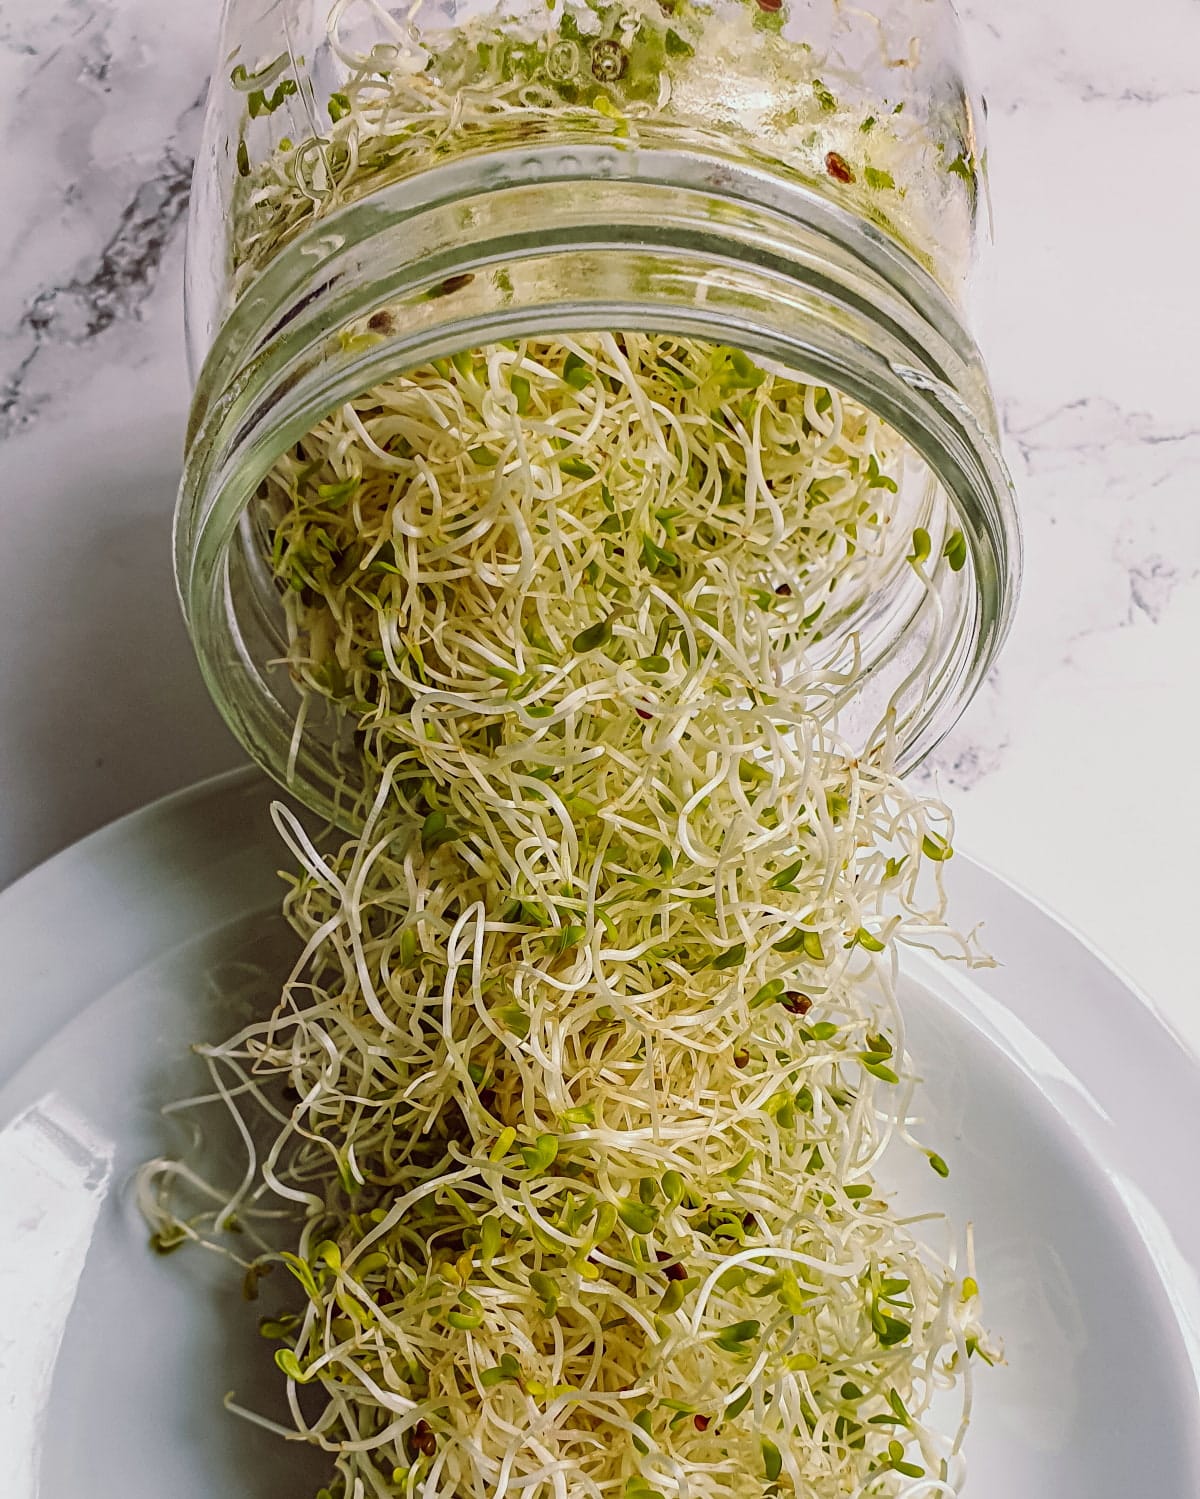 How to grow alfalfa sprouts